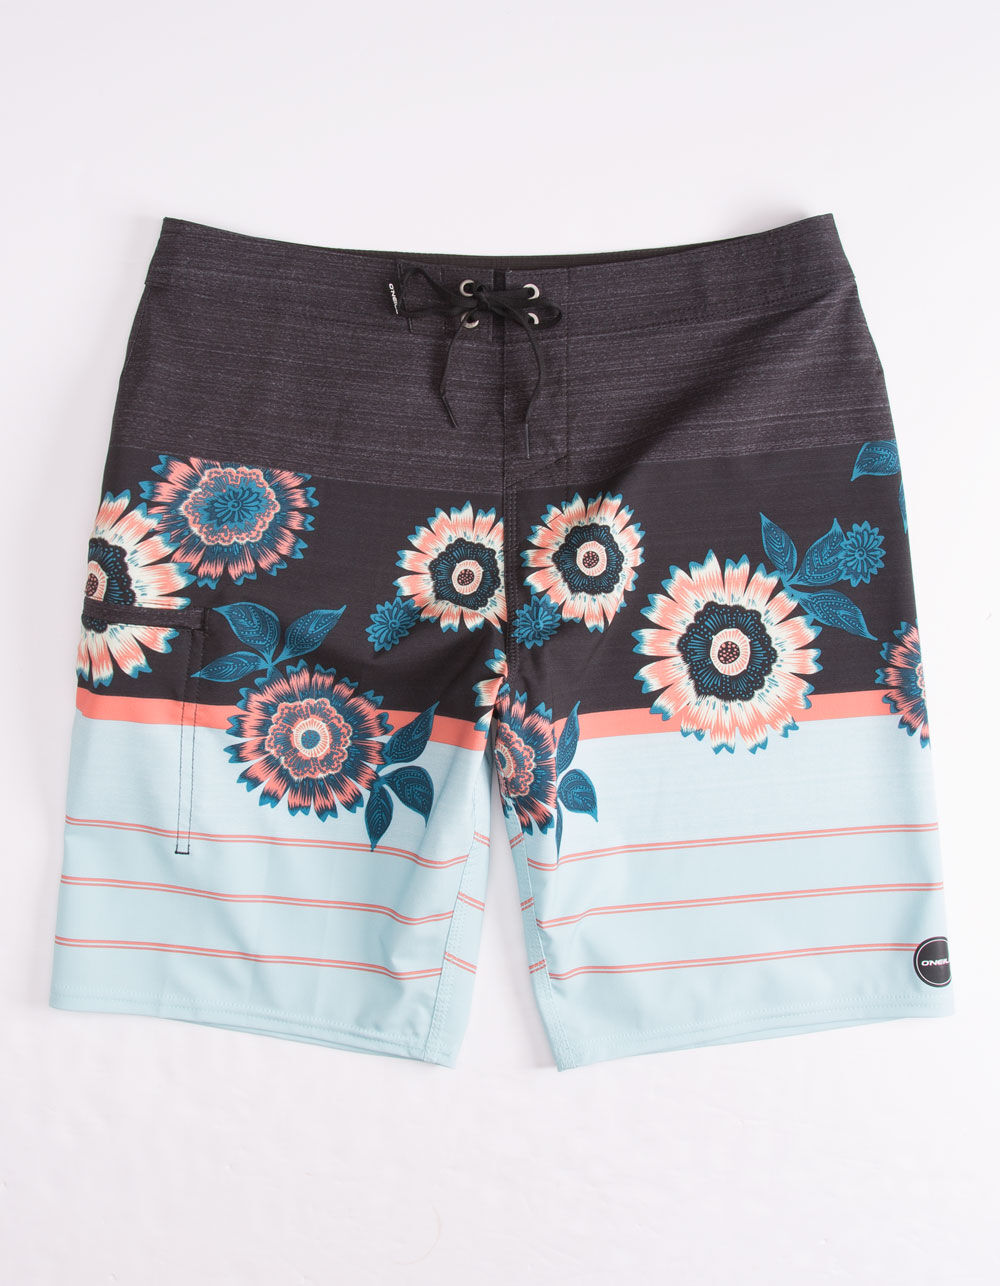 O'NEILL Heist Floral Mens Boardshorts image number 0